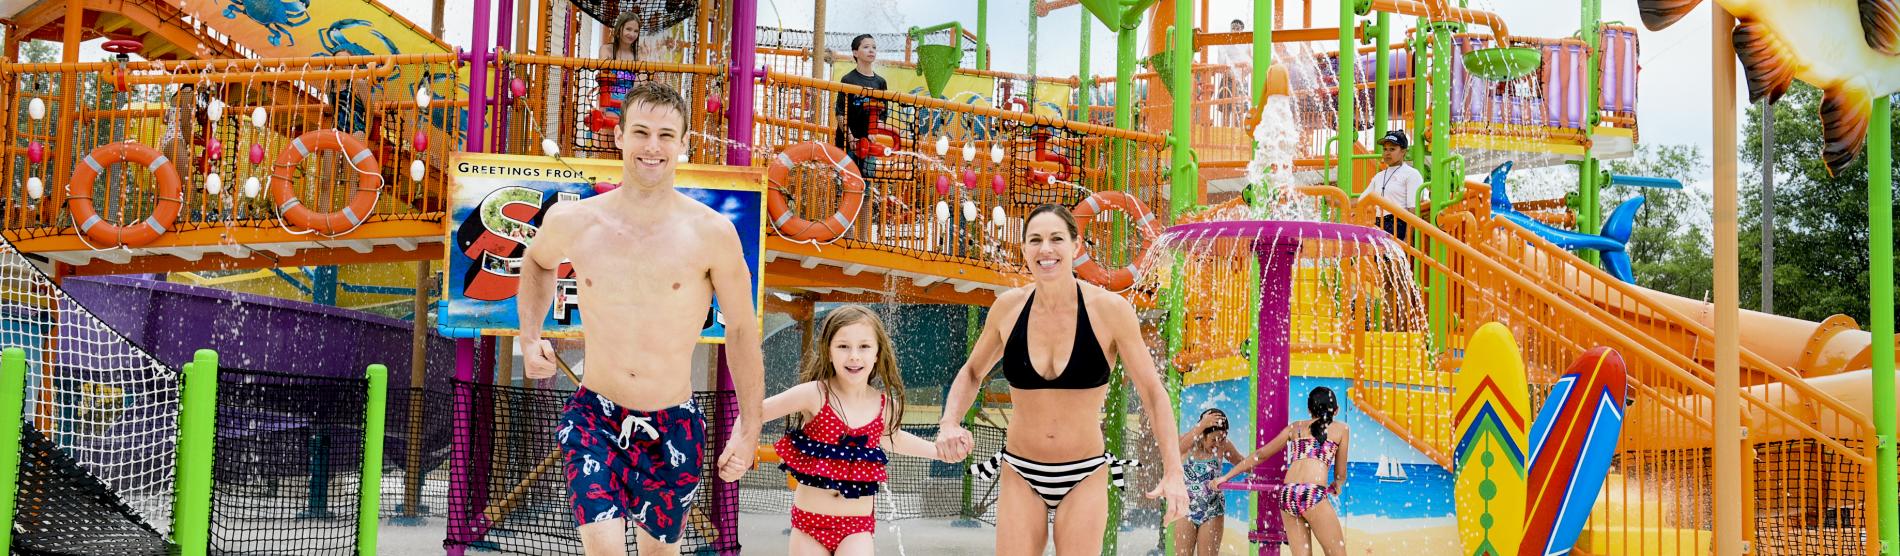 Family at Water Park